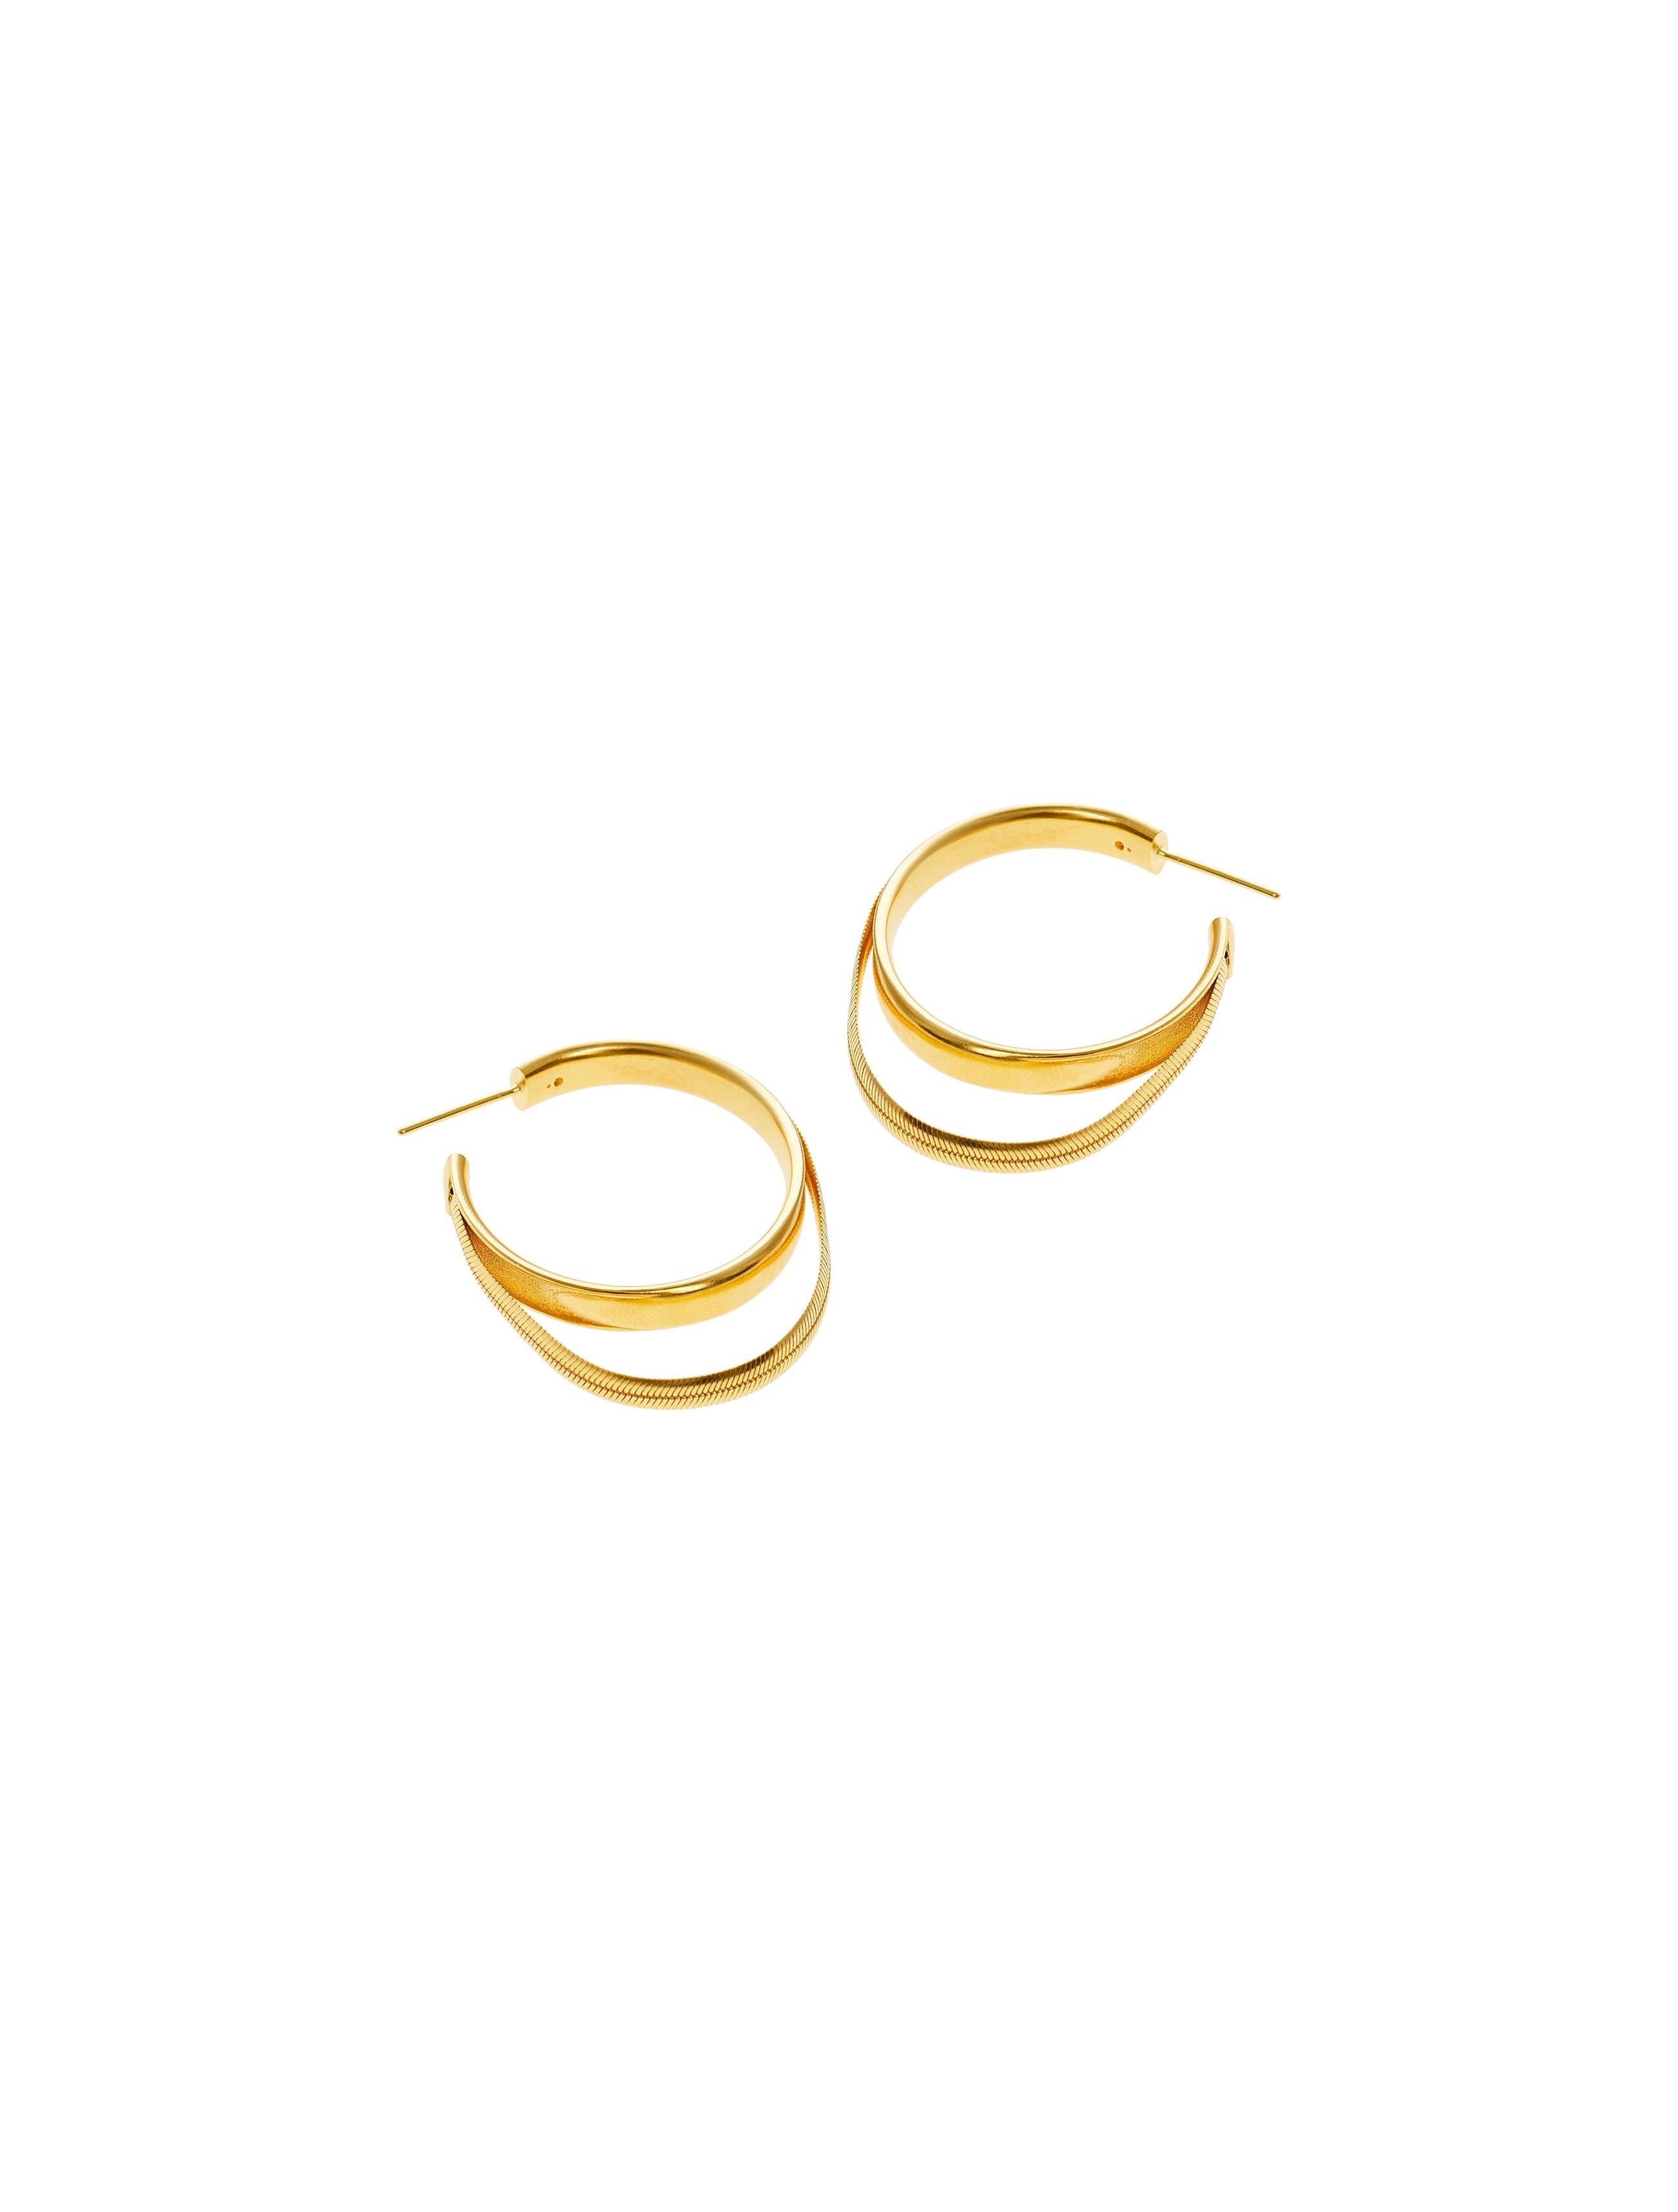 The nataraj hoops

An elevated version of our classic Twinkler hoops. The flat snake chain gives a more modern look while maintaining the freshness of this classic Maggoosh design.  

Earring posts are 10k gold to avoid allergies.


Handmade rubber